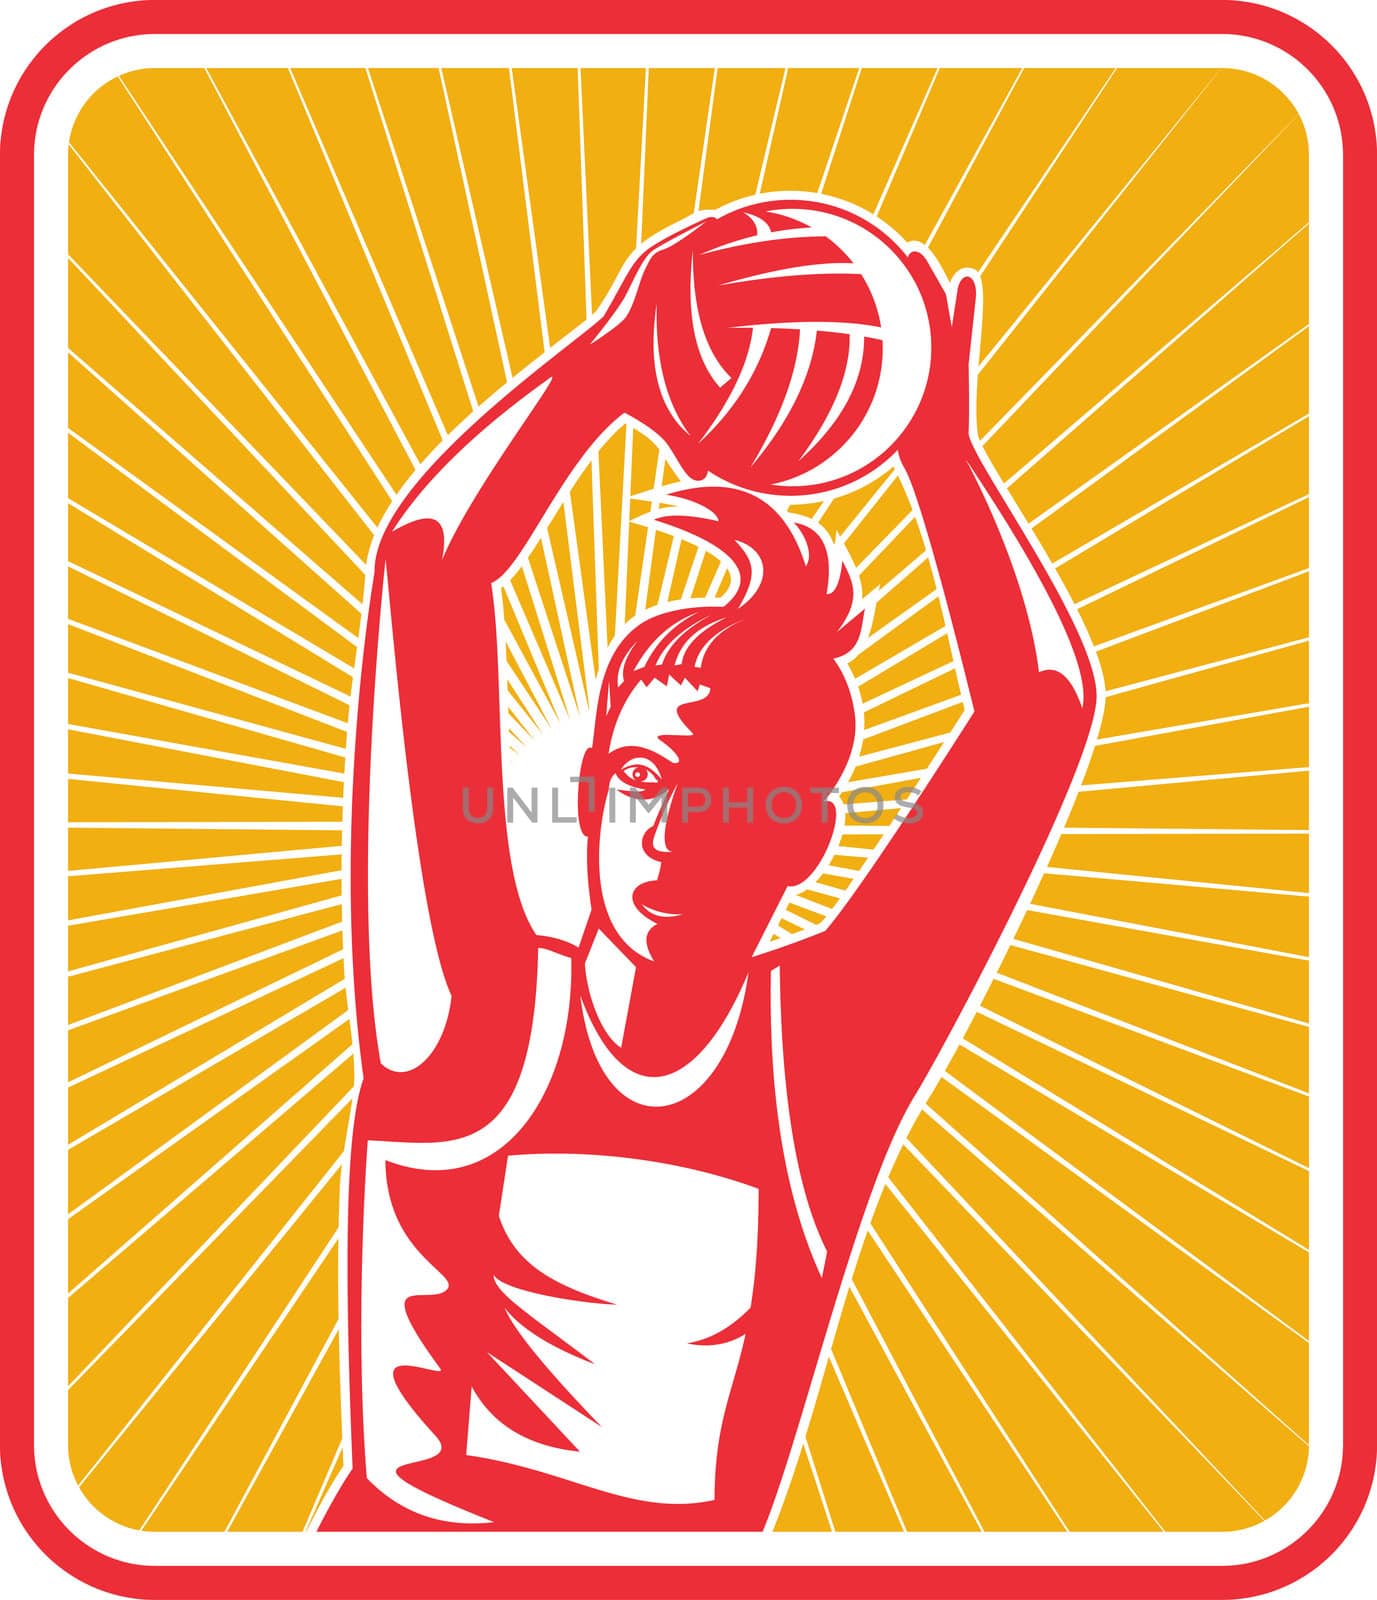 netball player catching or passing ball by patrimonio